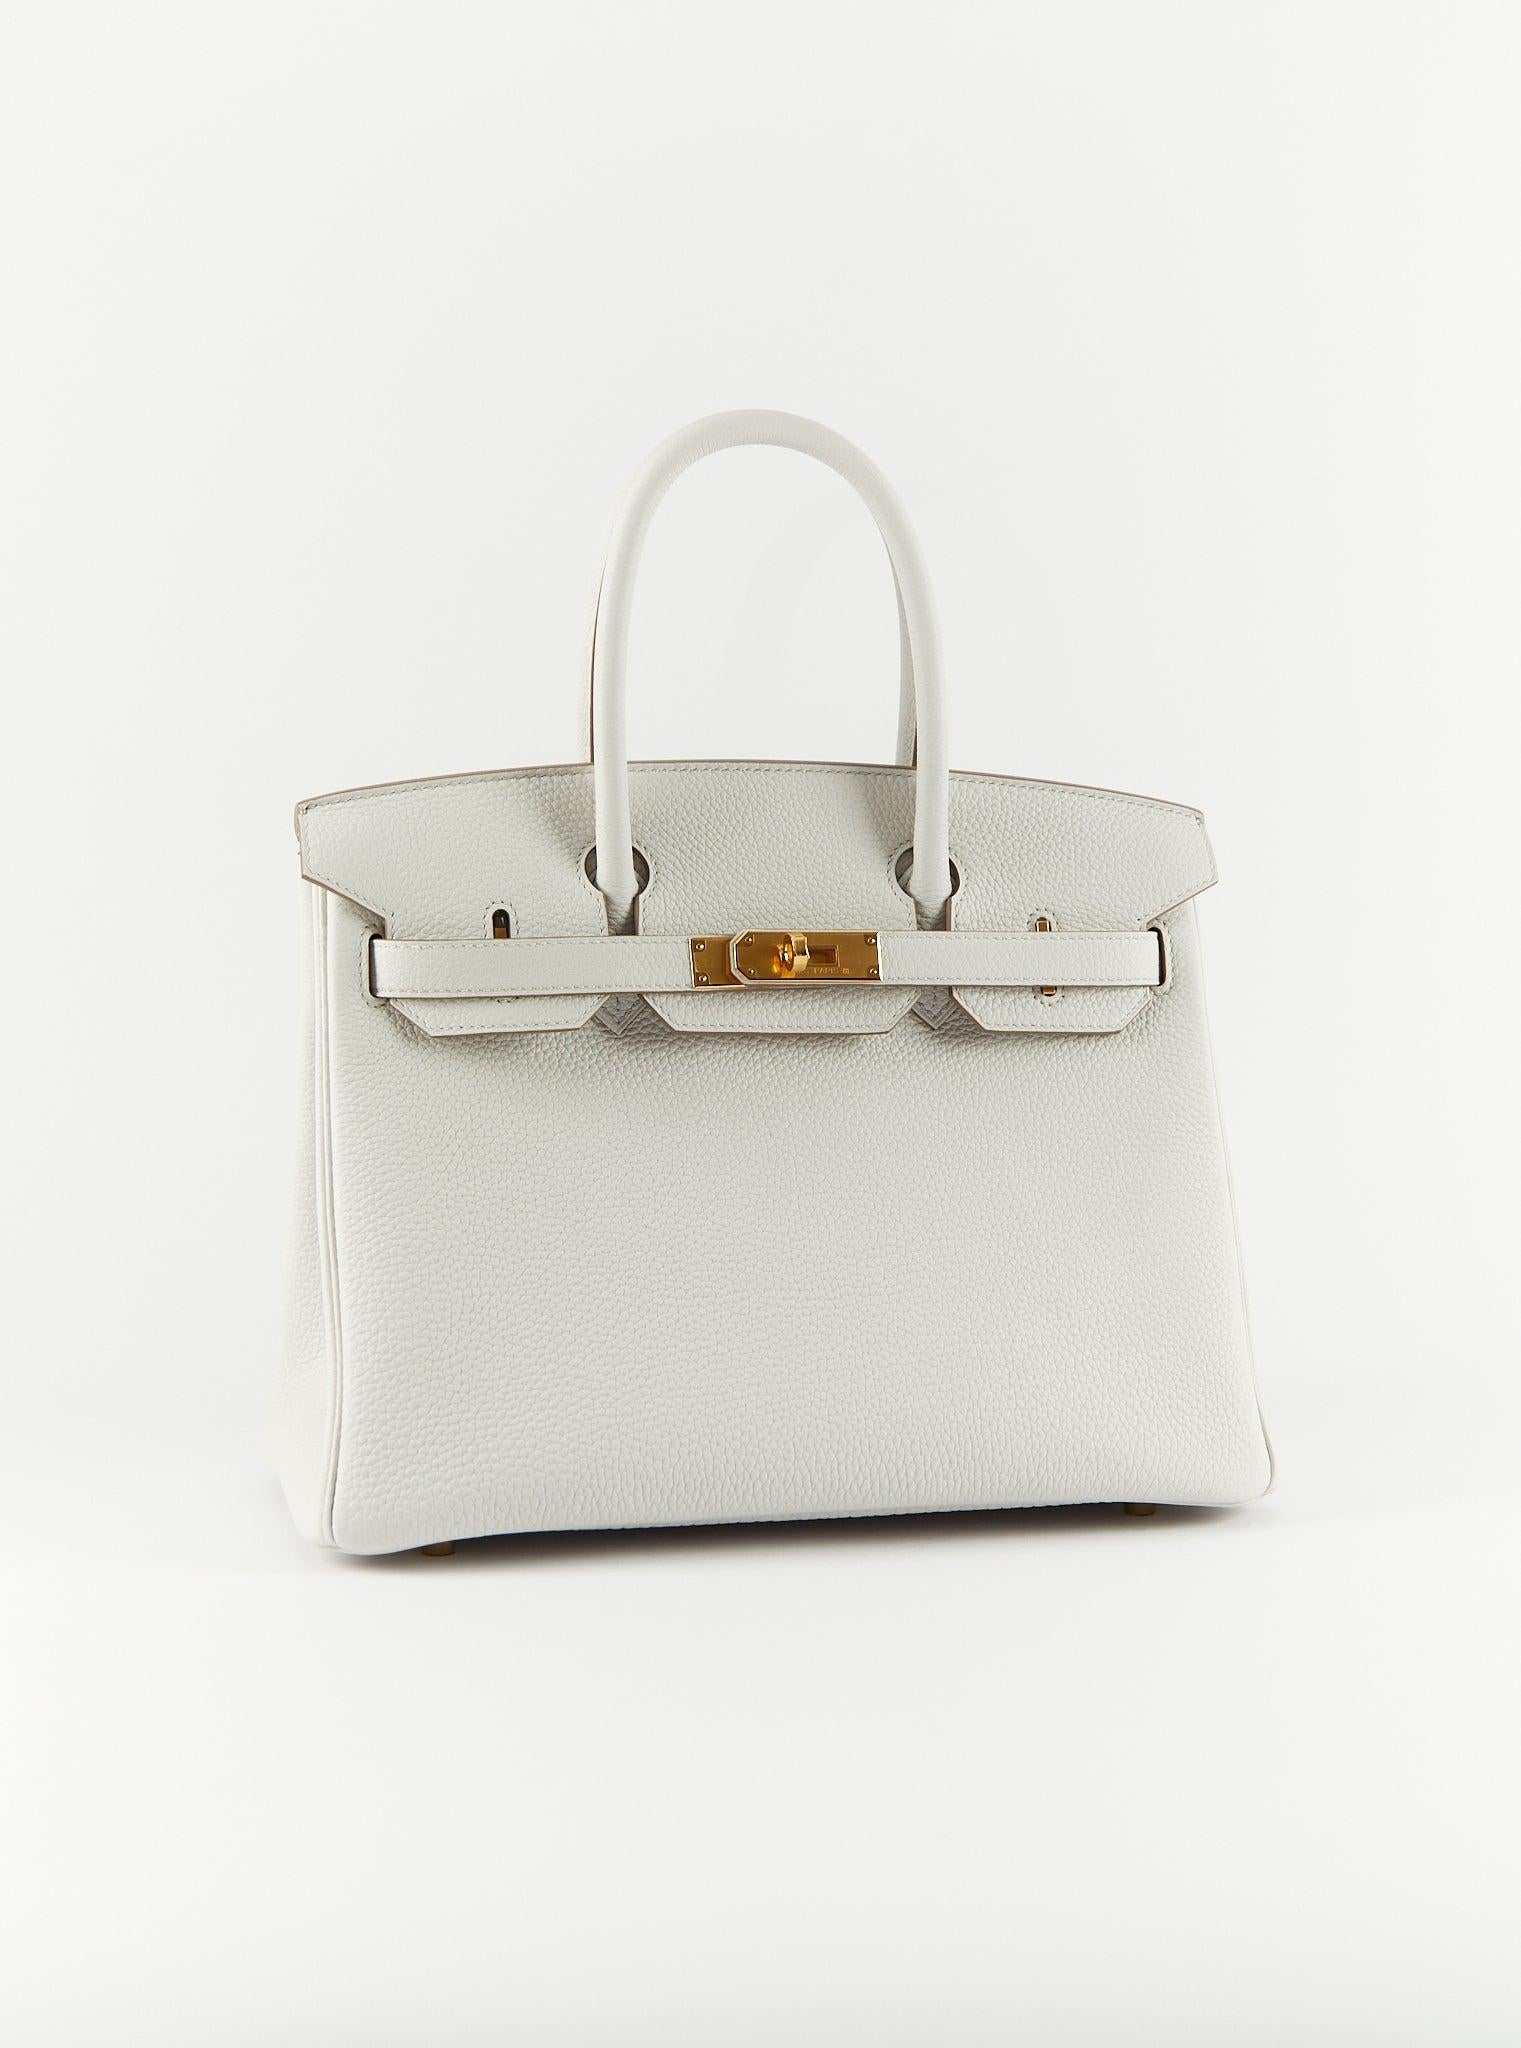 HERMÈS BIRKIN 30CM GRIS PALE Togo Leather with Gold Hardware In Excellent Condition In London, GB